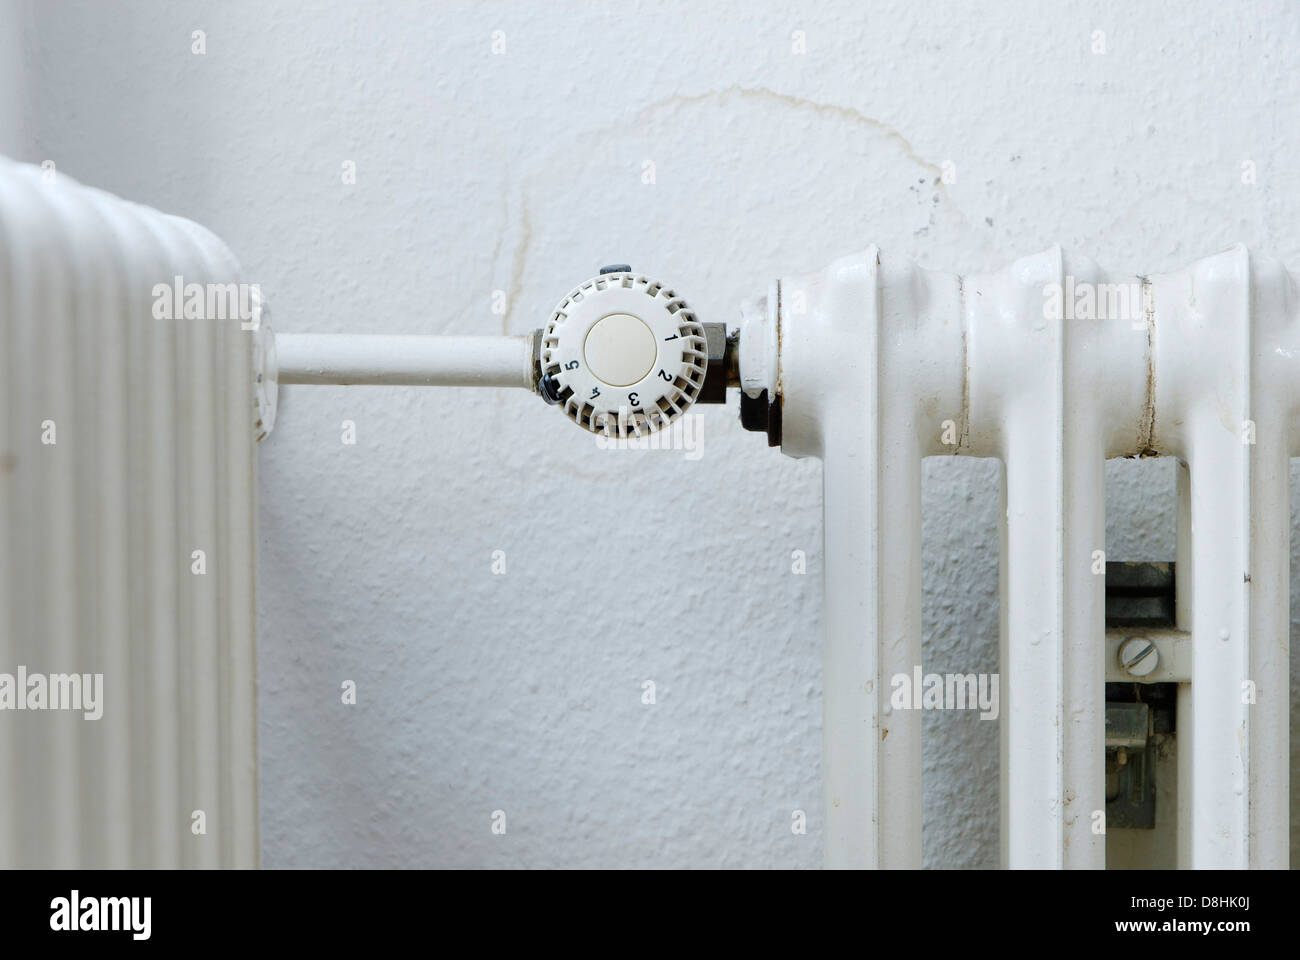 radiator with thermostatic control Stock Photo